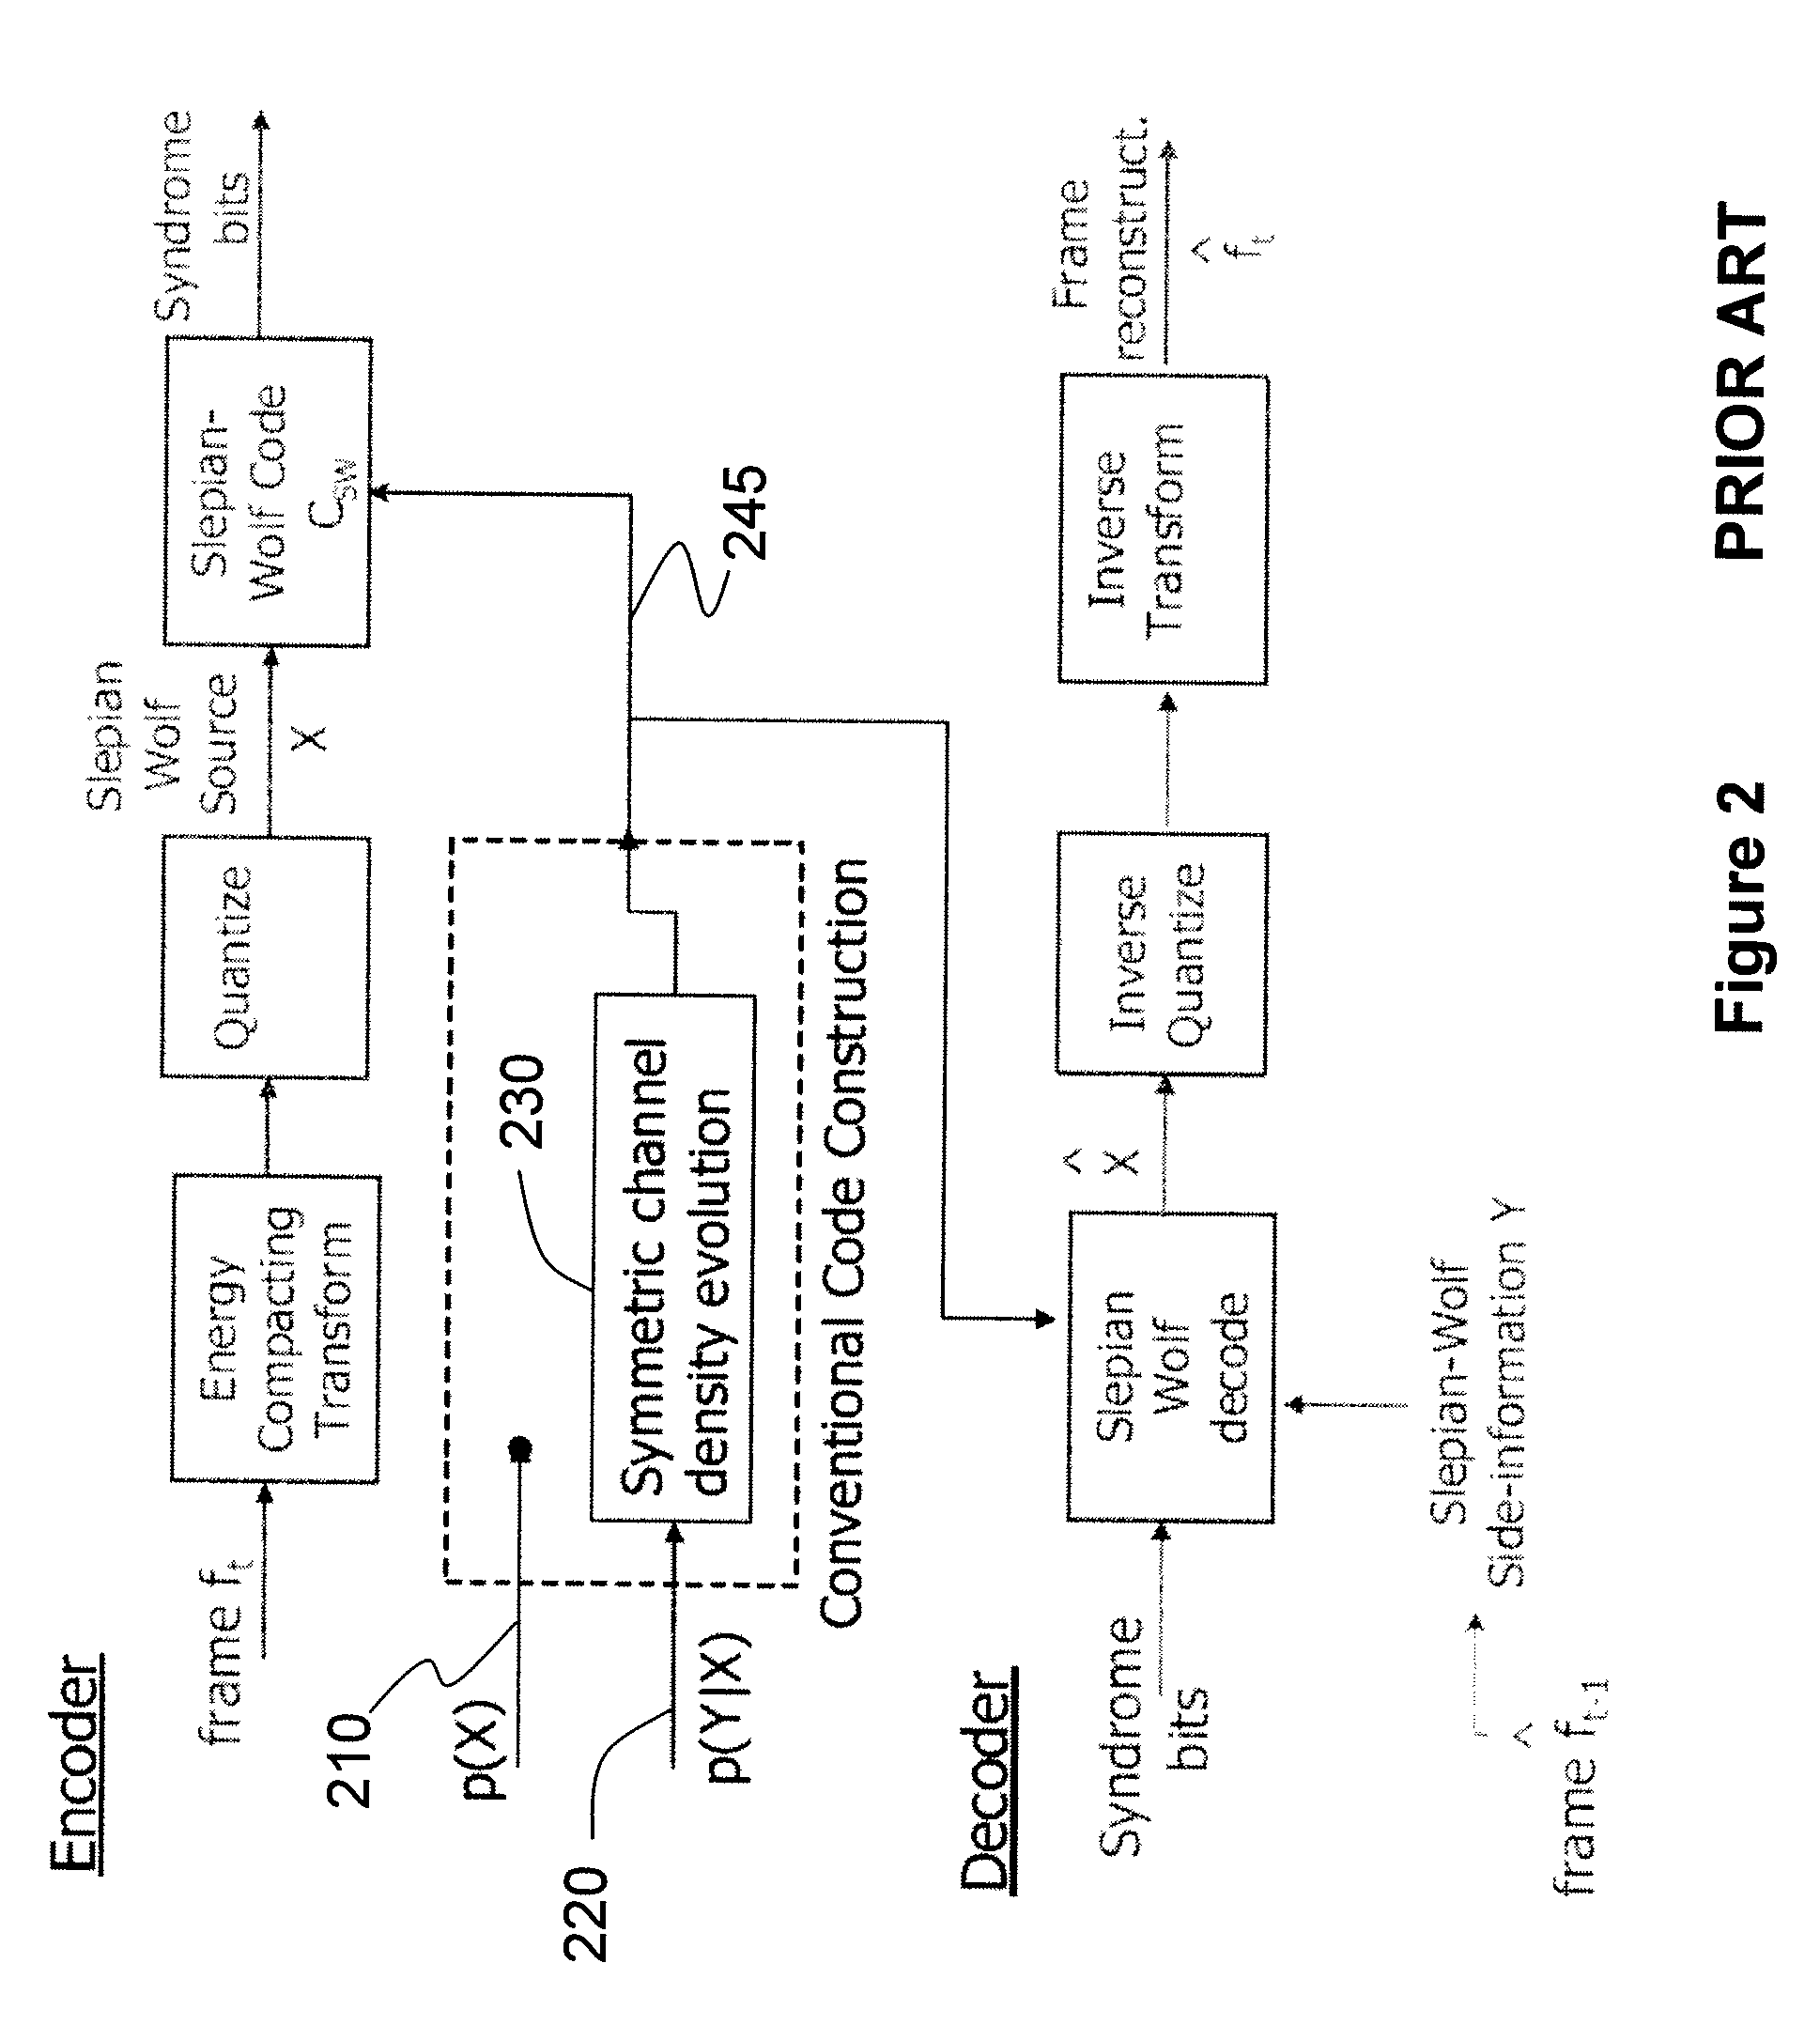 Method and apparatus for constructing efficient codes for Wyner-Ziv video compression systems